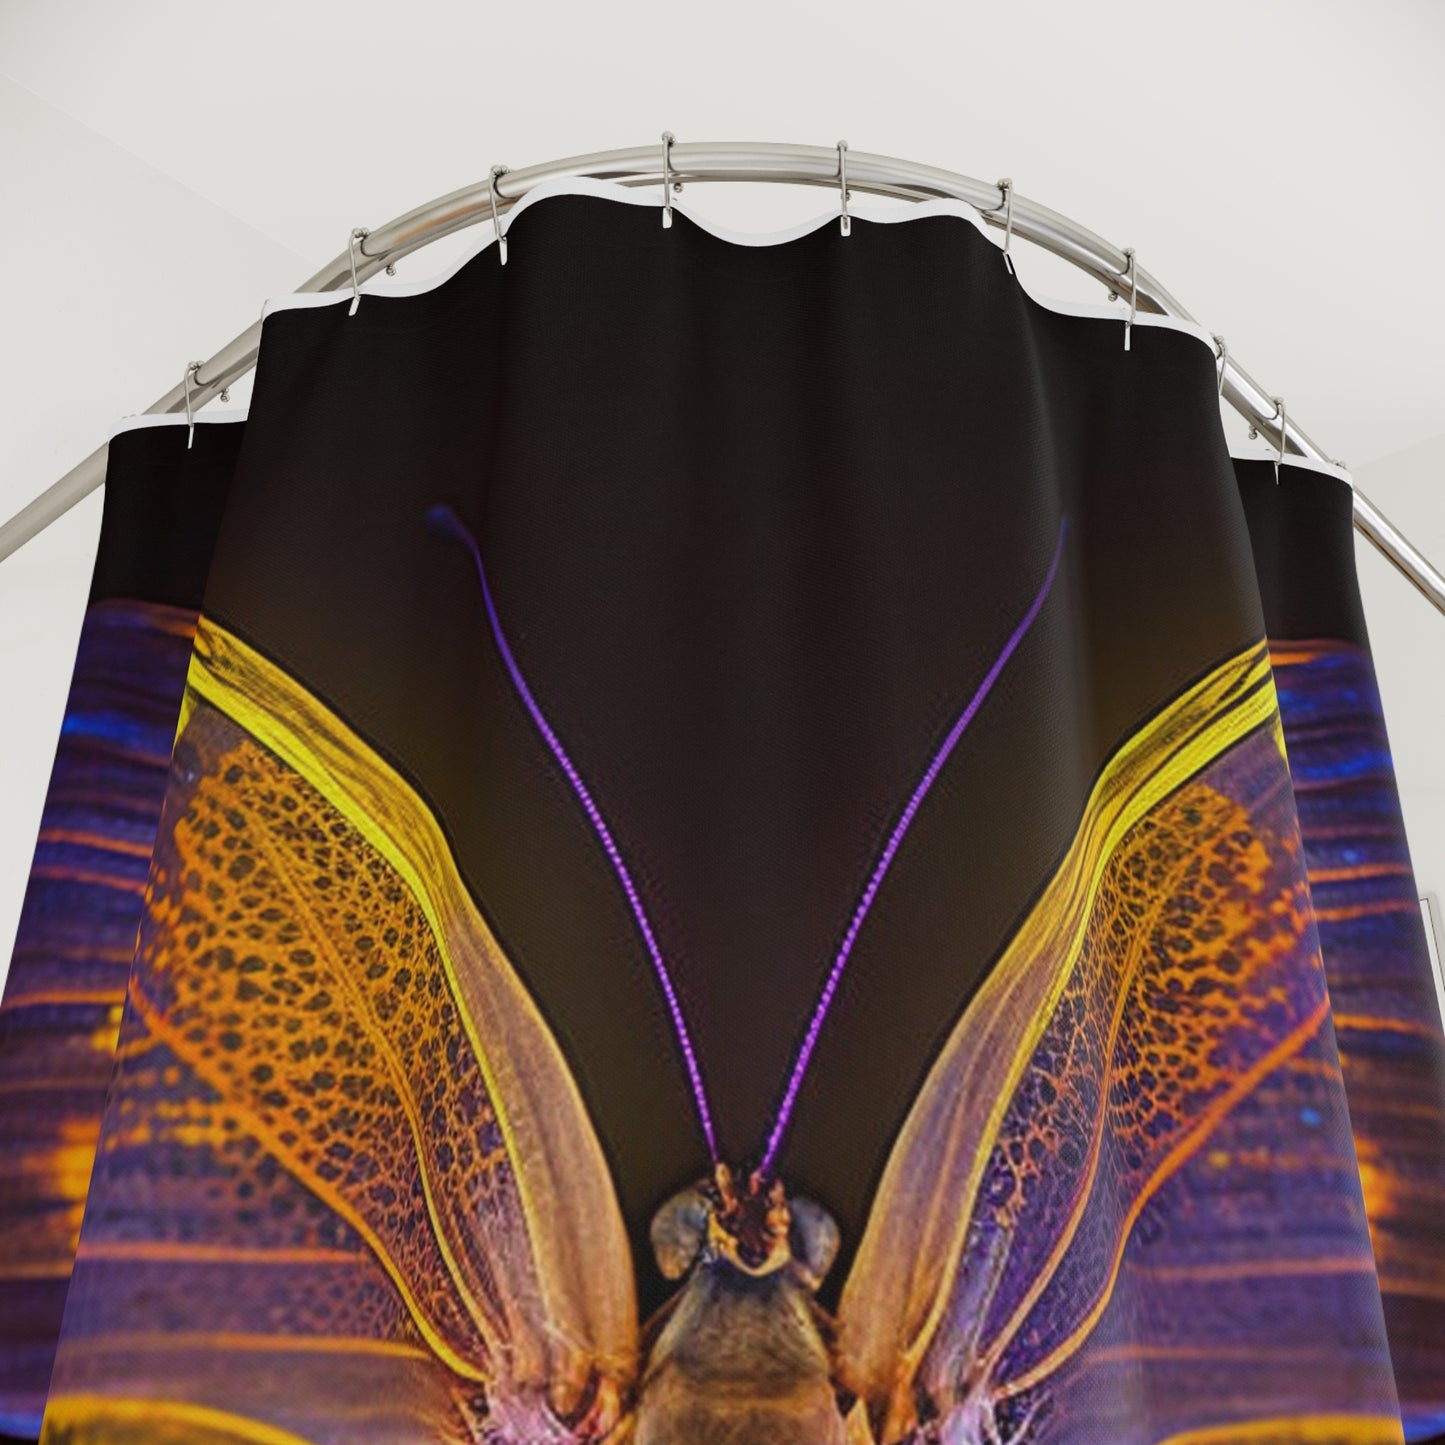 Polyester Shower Curtain Neon Butterfly Flair 2